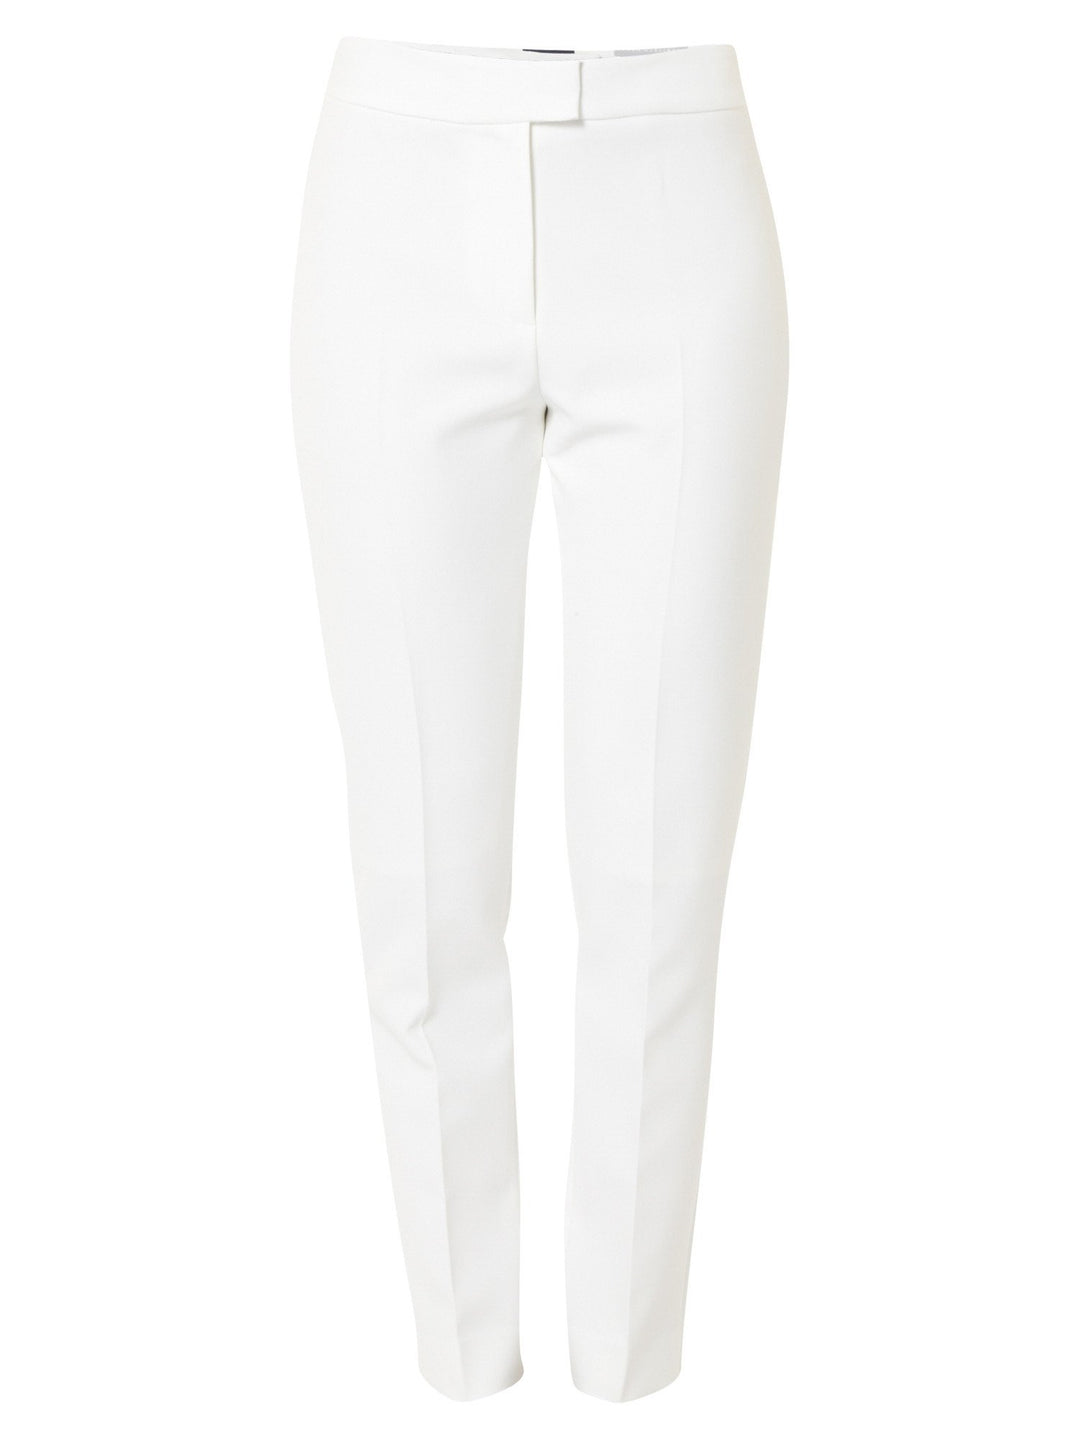  Investment-worthy, neat narrow-leg trouser with a hint of stretch. A wardrobe staple and HMcA classic, here in optical white.